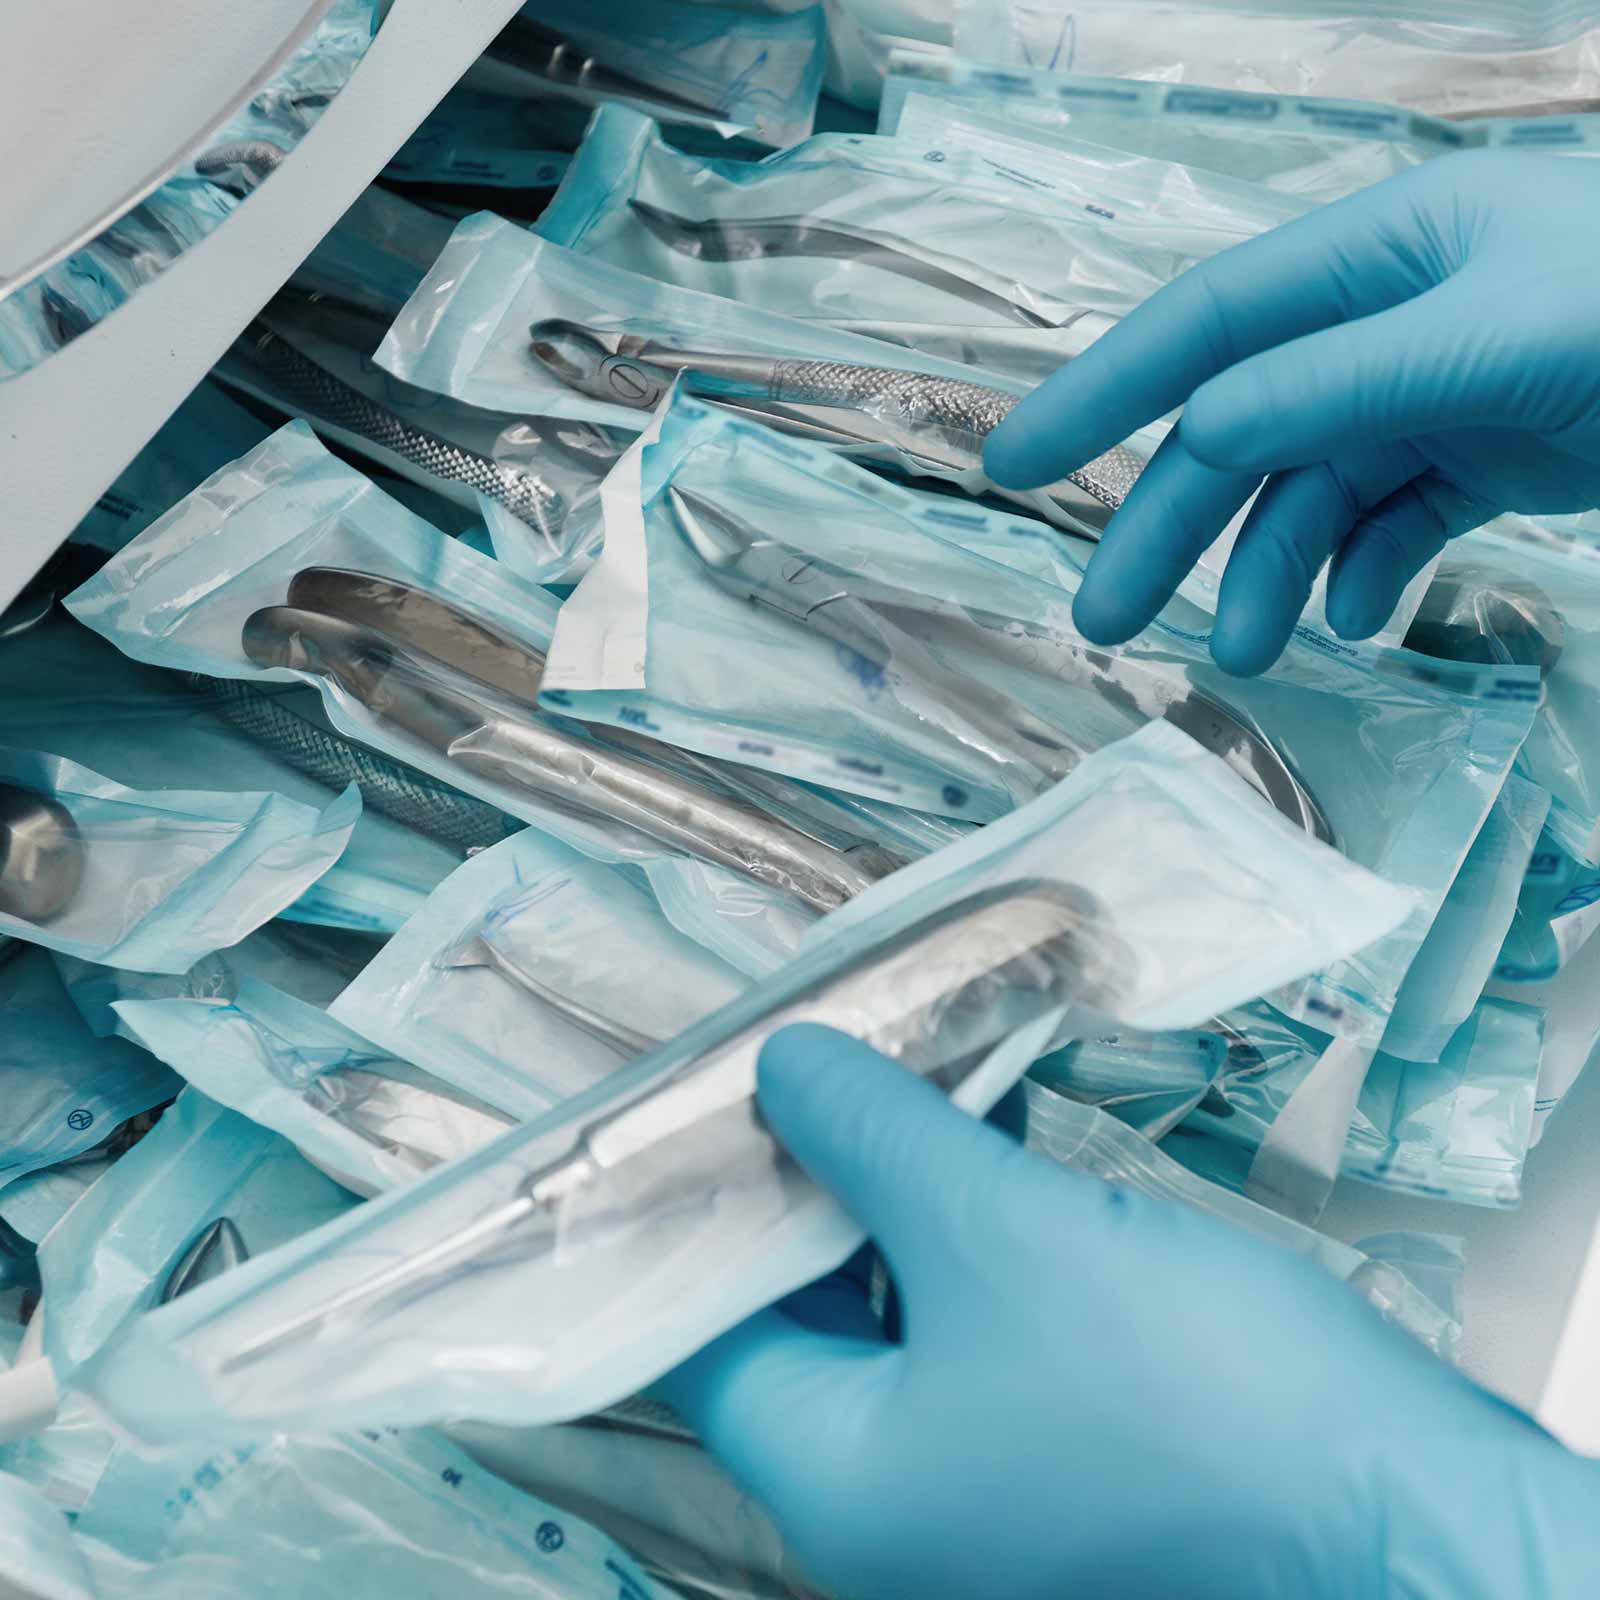 Manufacturing sterile disposable instruments.